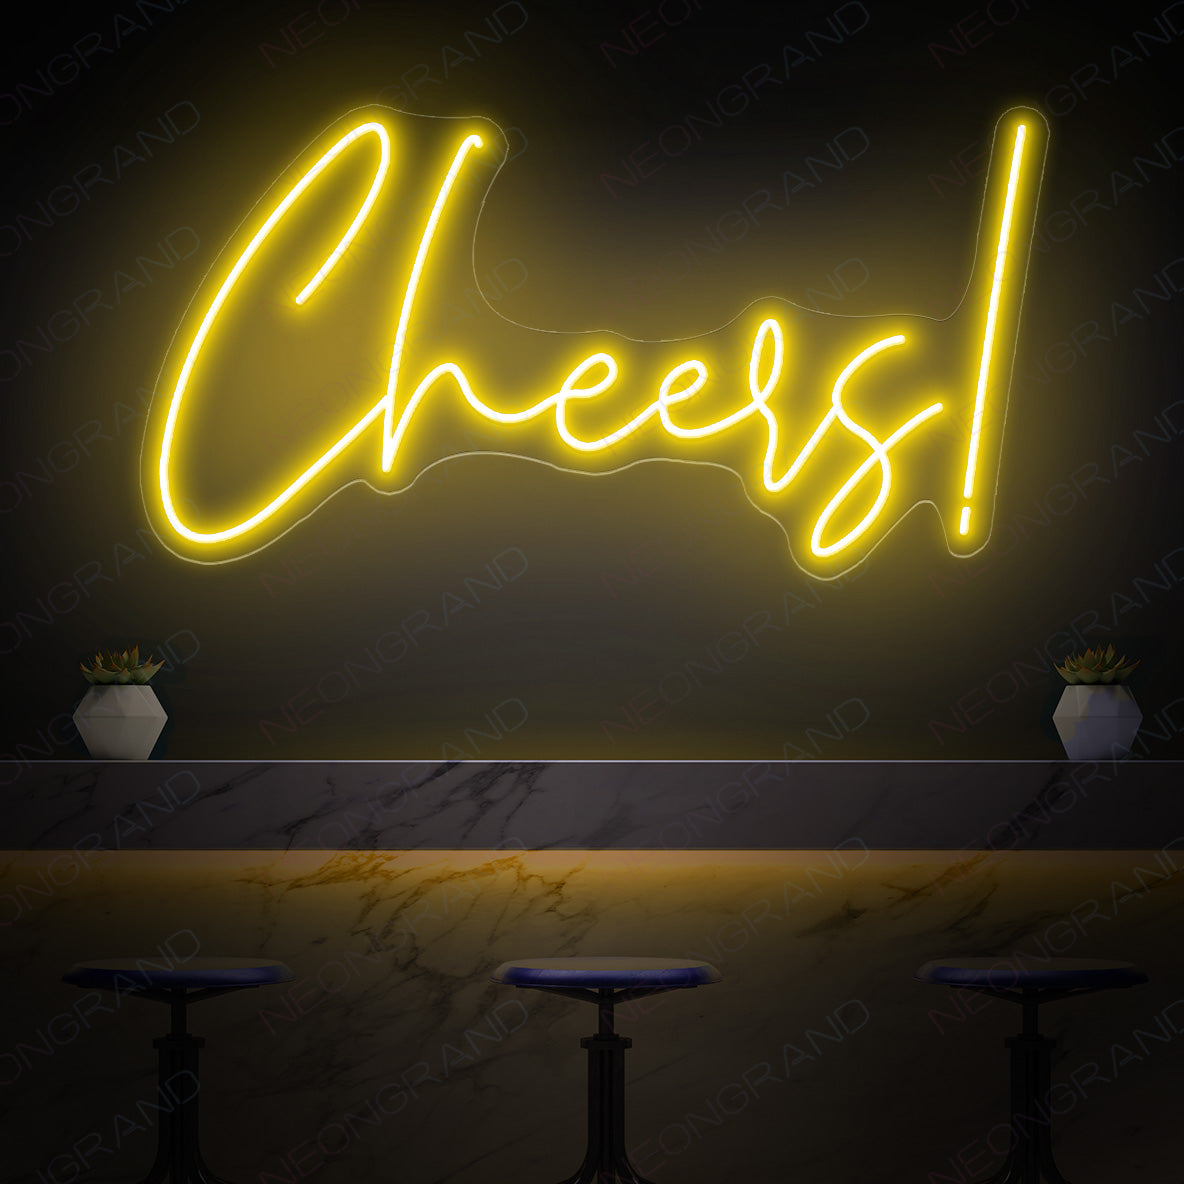 Cheers Neon Sign Led Light Up Sign